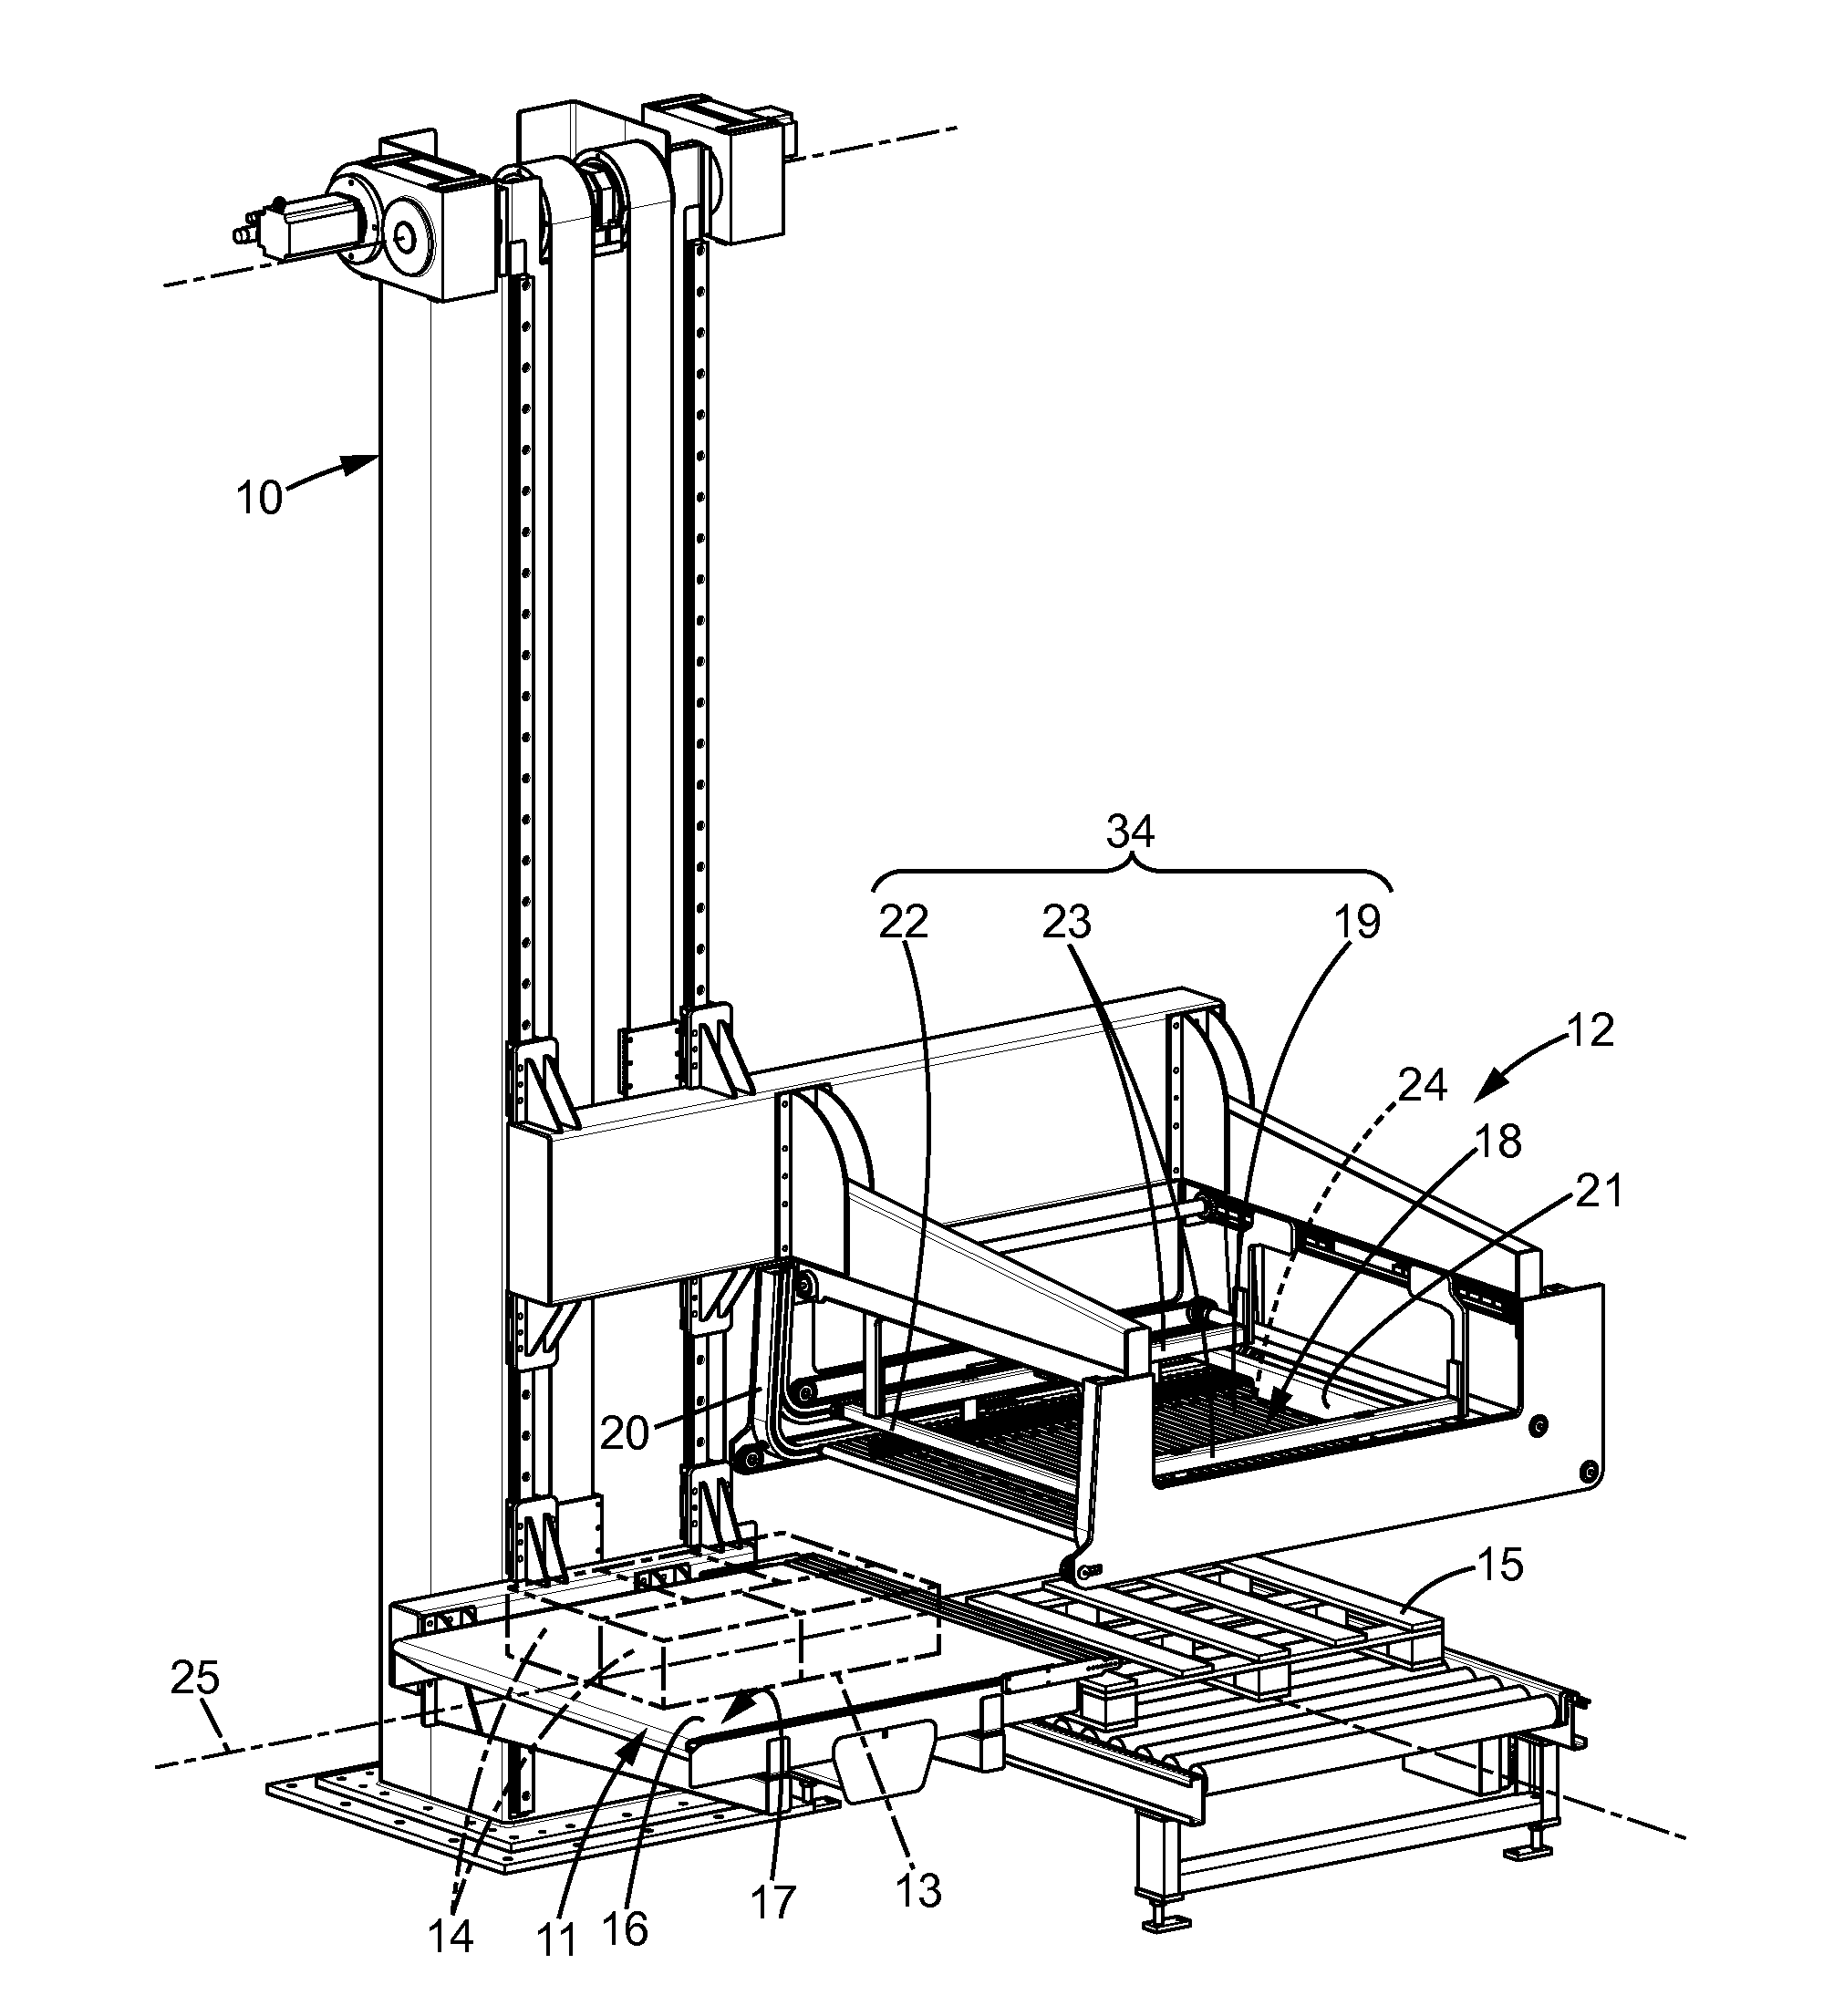 Palletizer, palletizing method, and transfer of a layer of objects by palletizer from a conveyor to a layer depositing tool